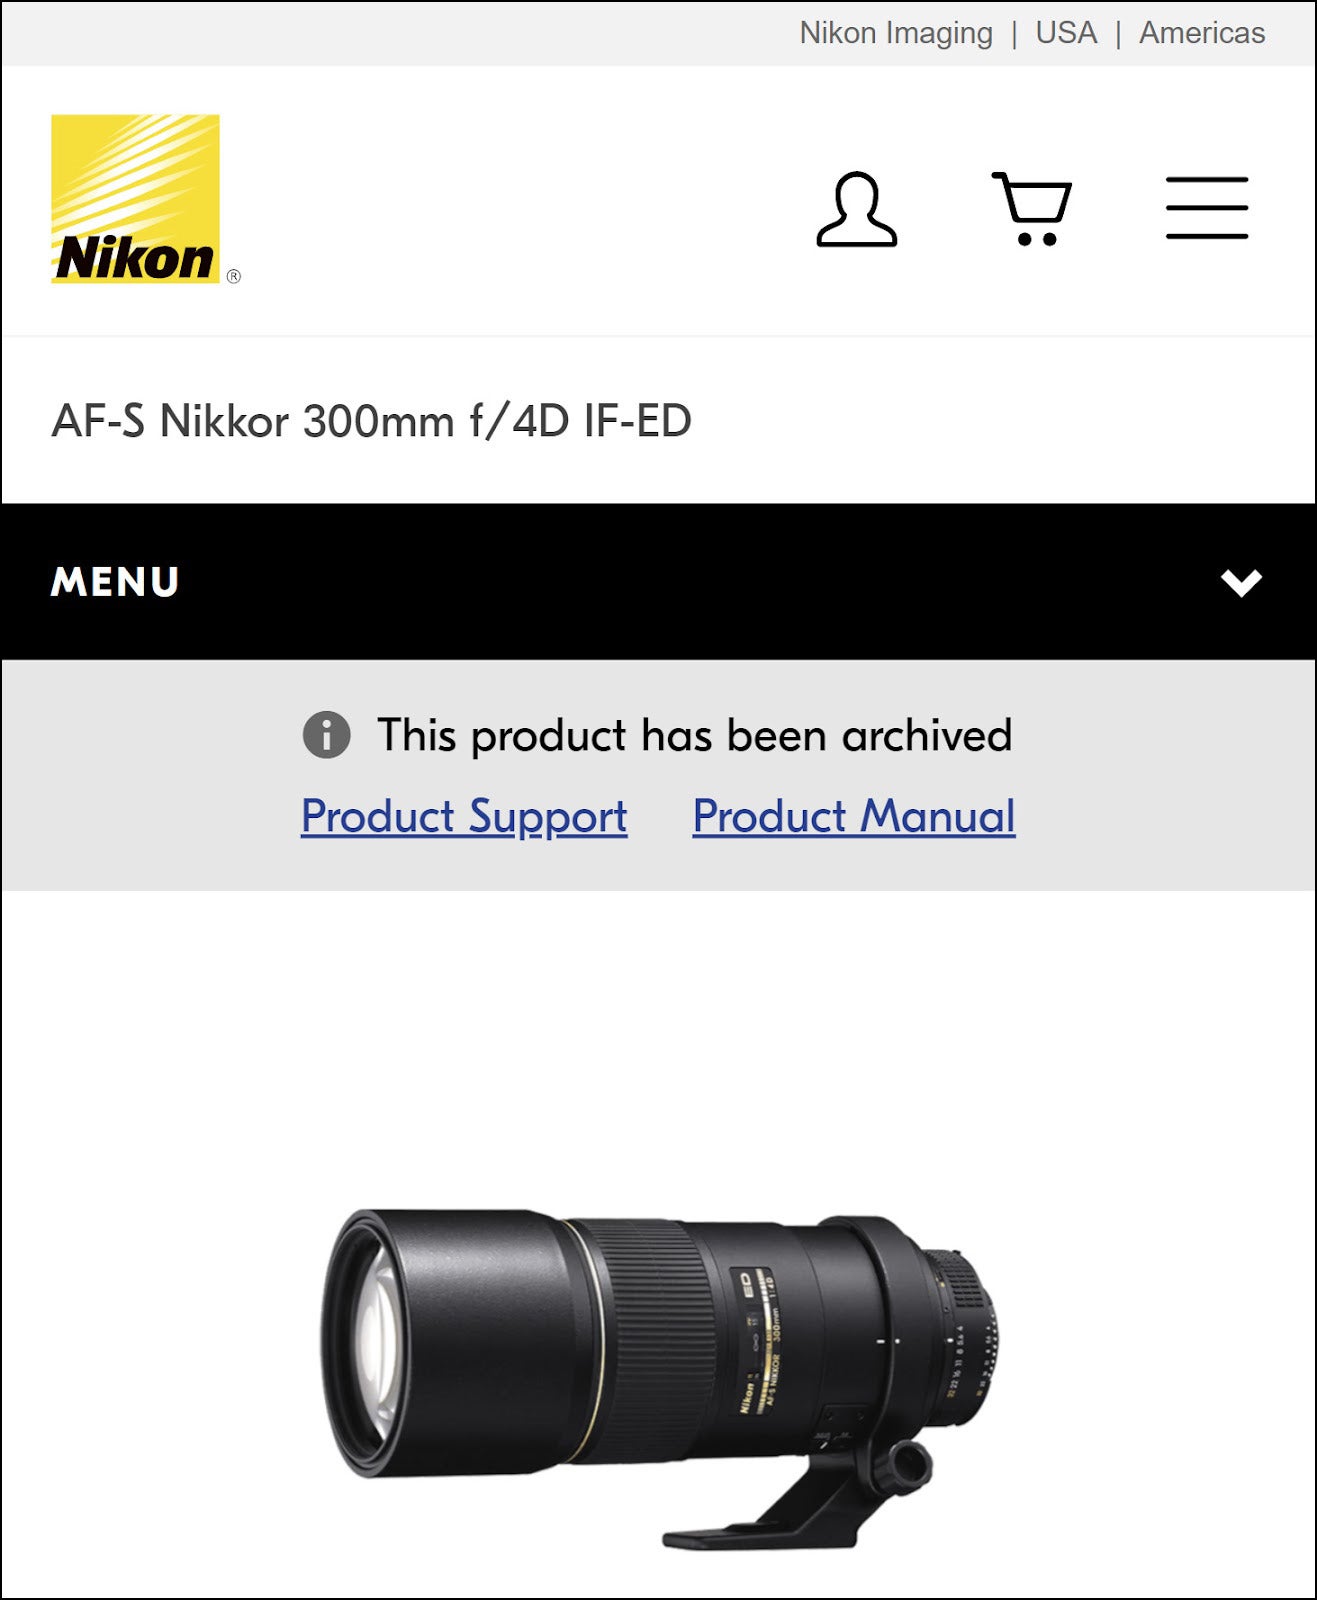 Nikon DSLR lens page shows the lens is archived.